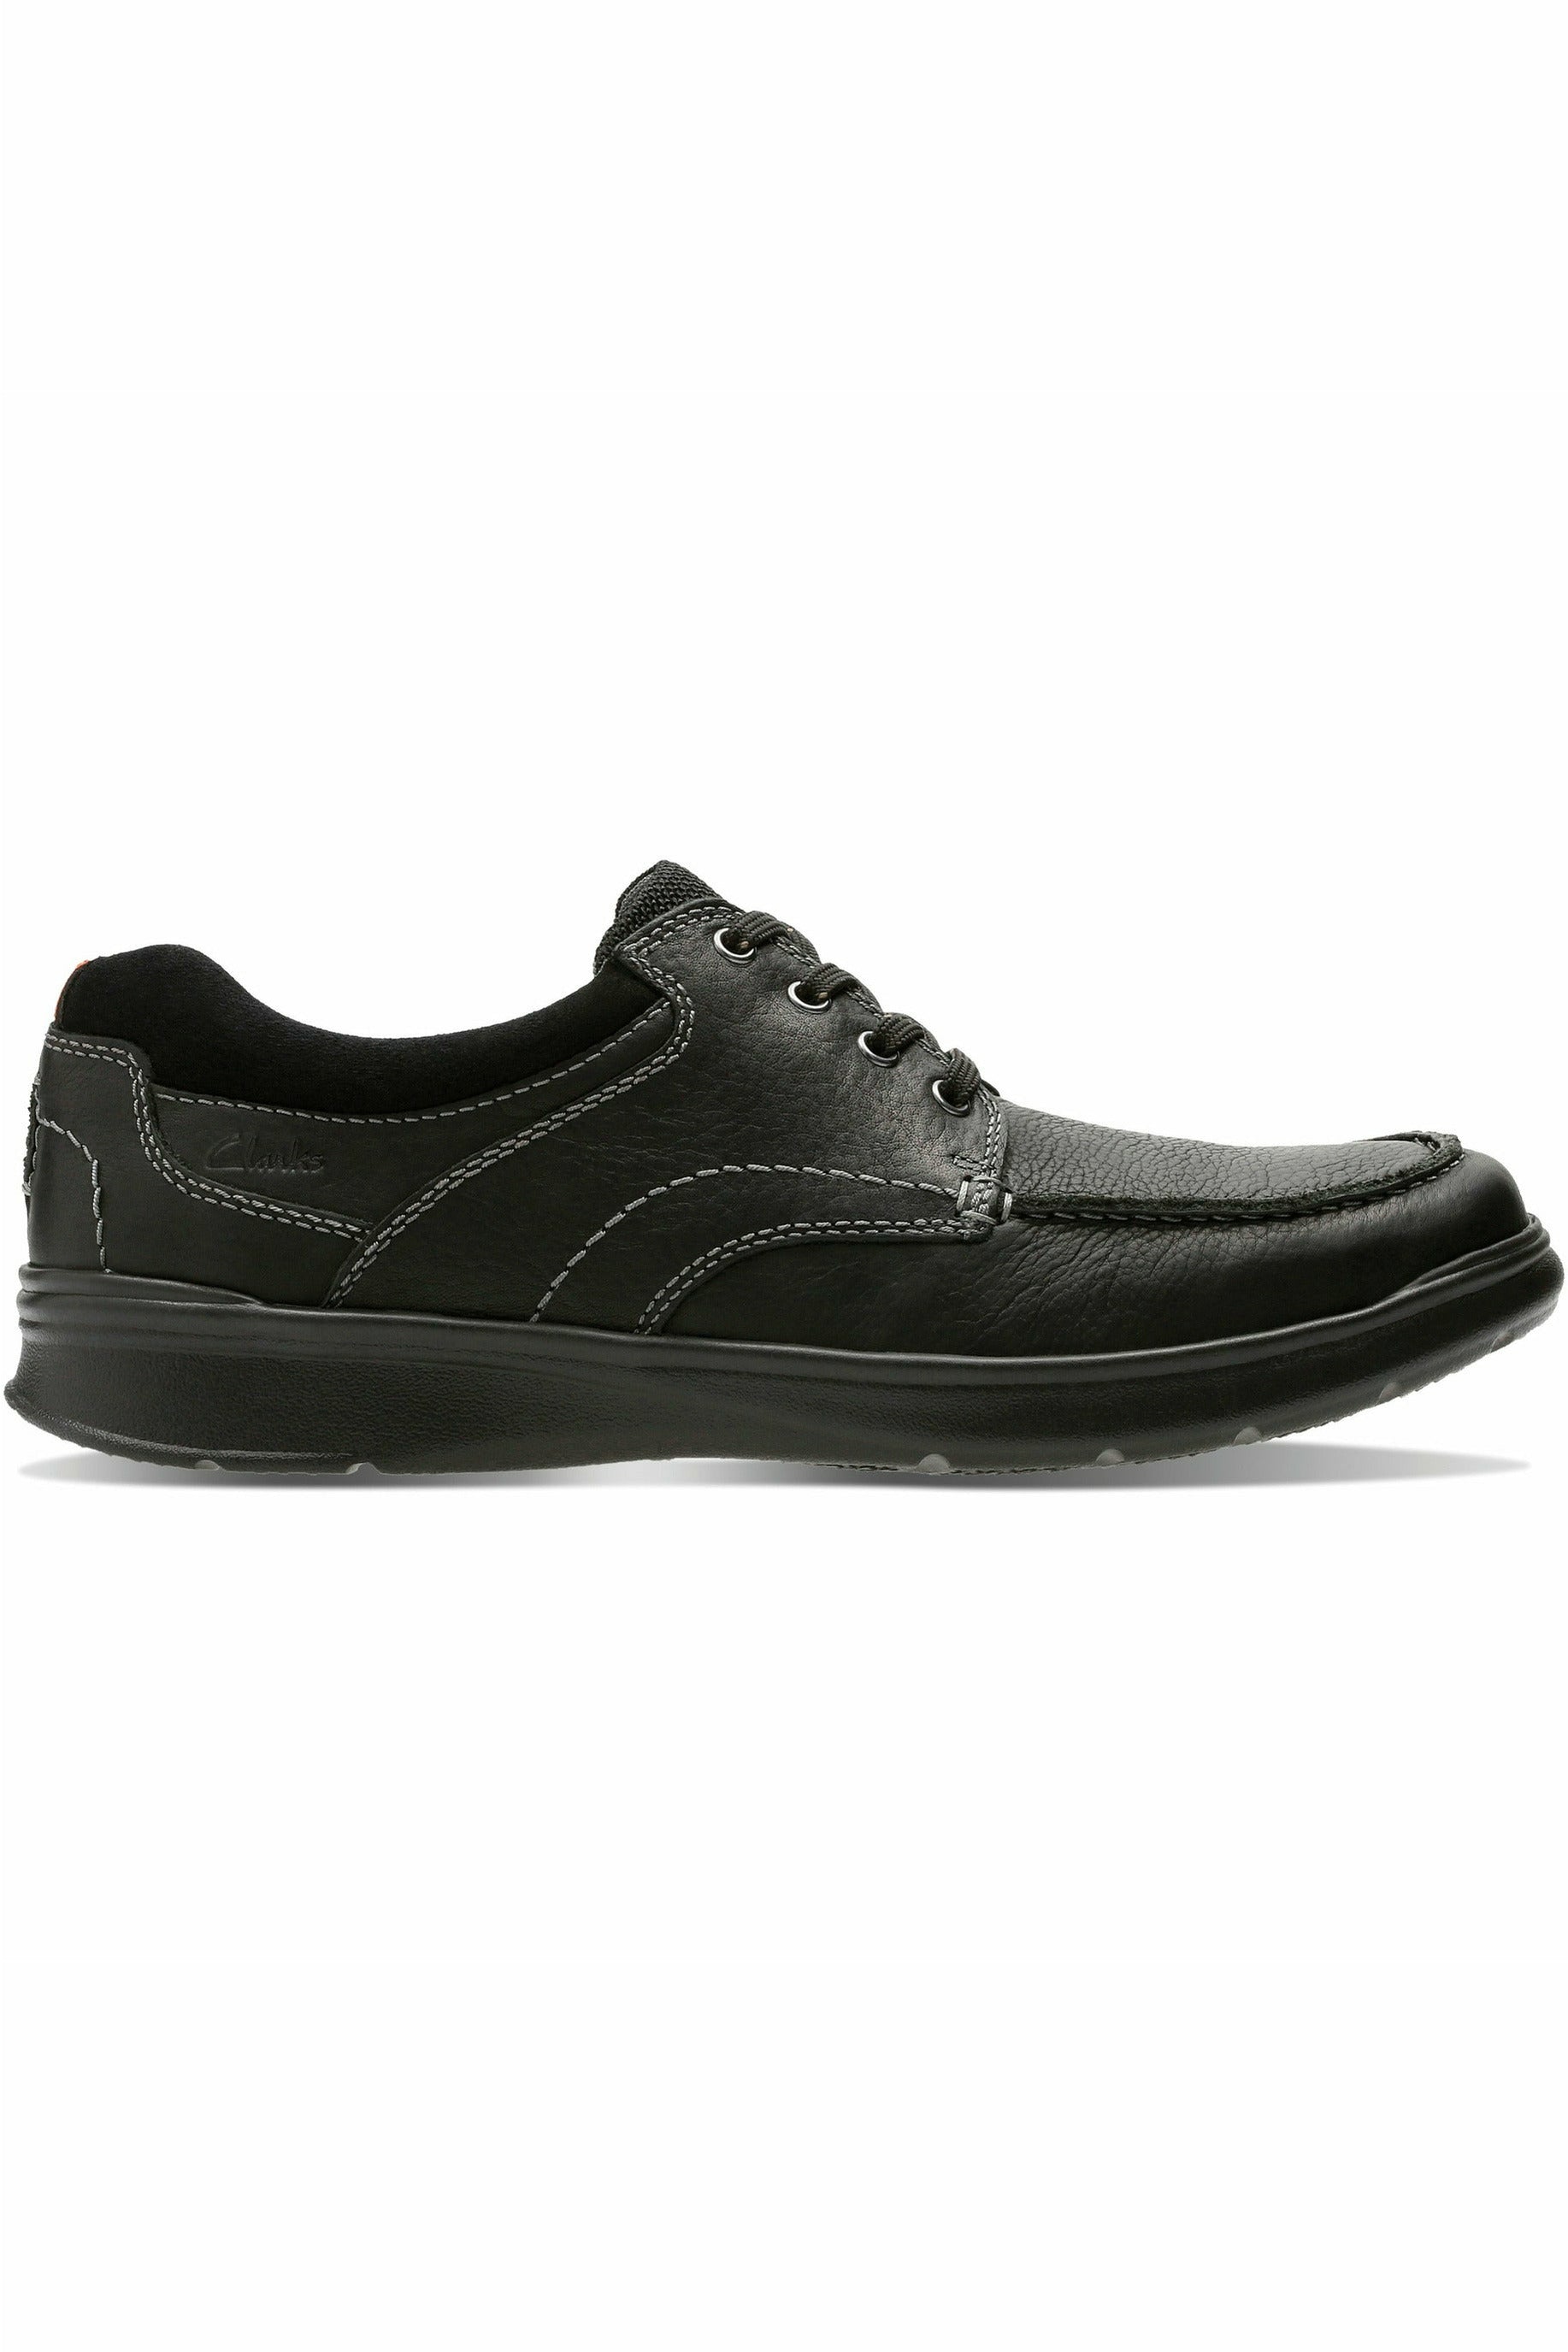 Clarks Cotrell Edge black oily G Standard Fit